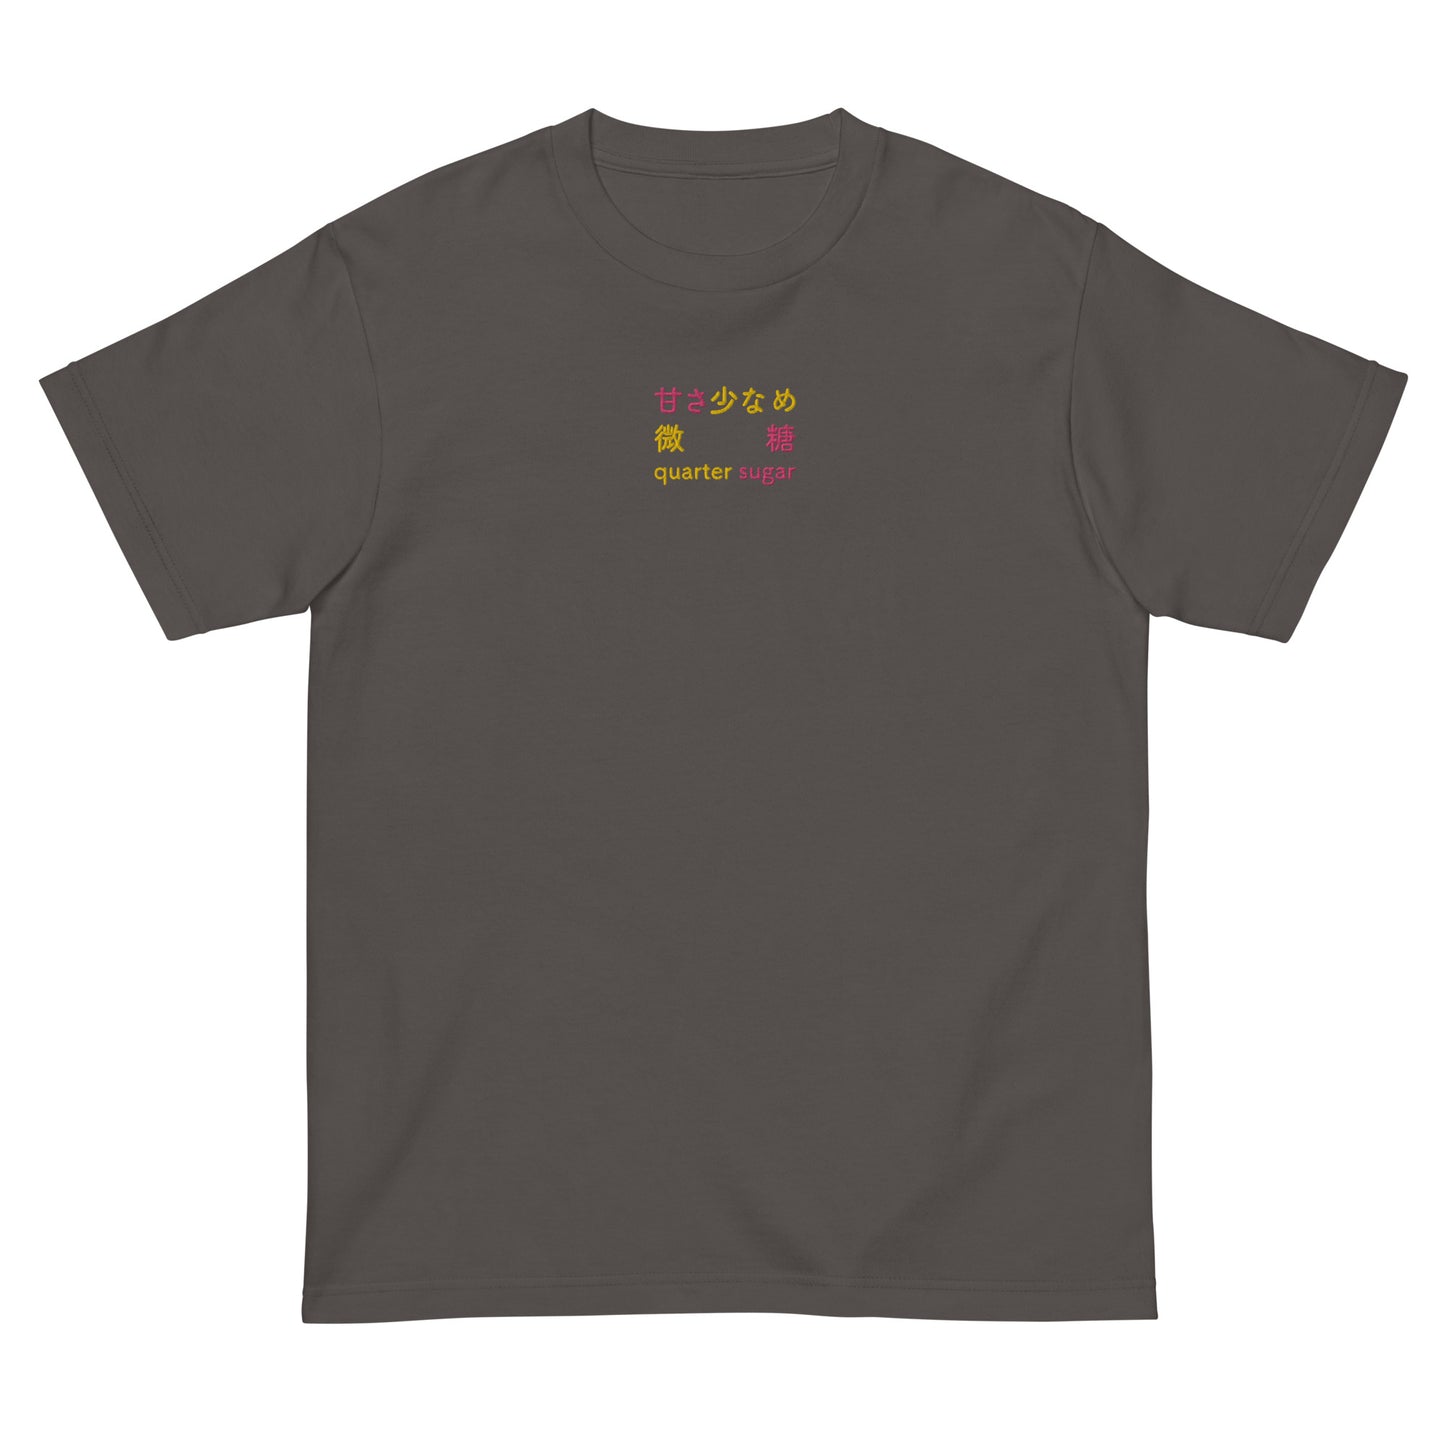 Dark Gray High Quality Tee - Front Design with an Yellow, Pink Embroidery "Quarter Sugar" in Japanese,Chinese and English